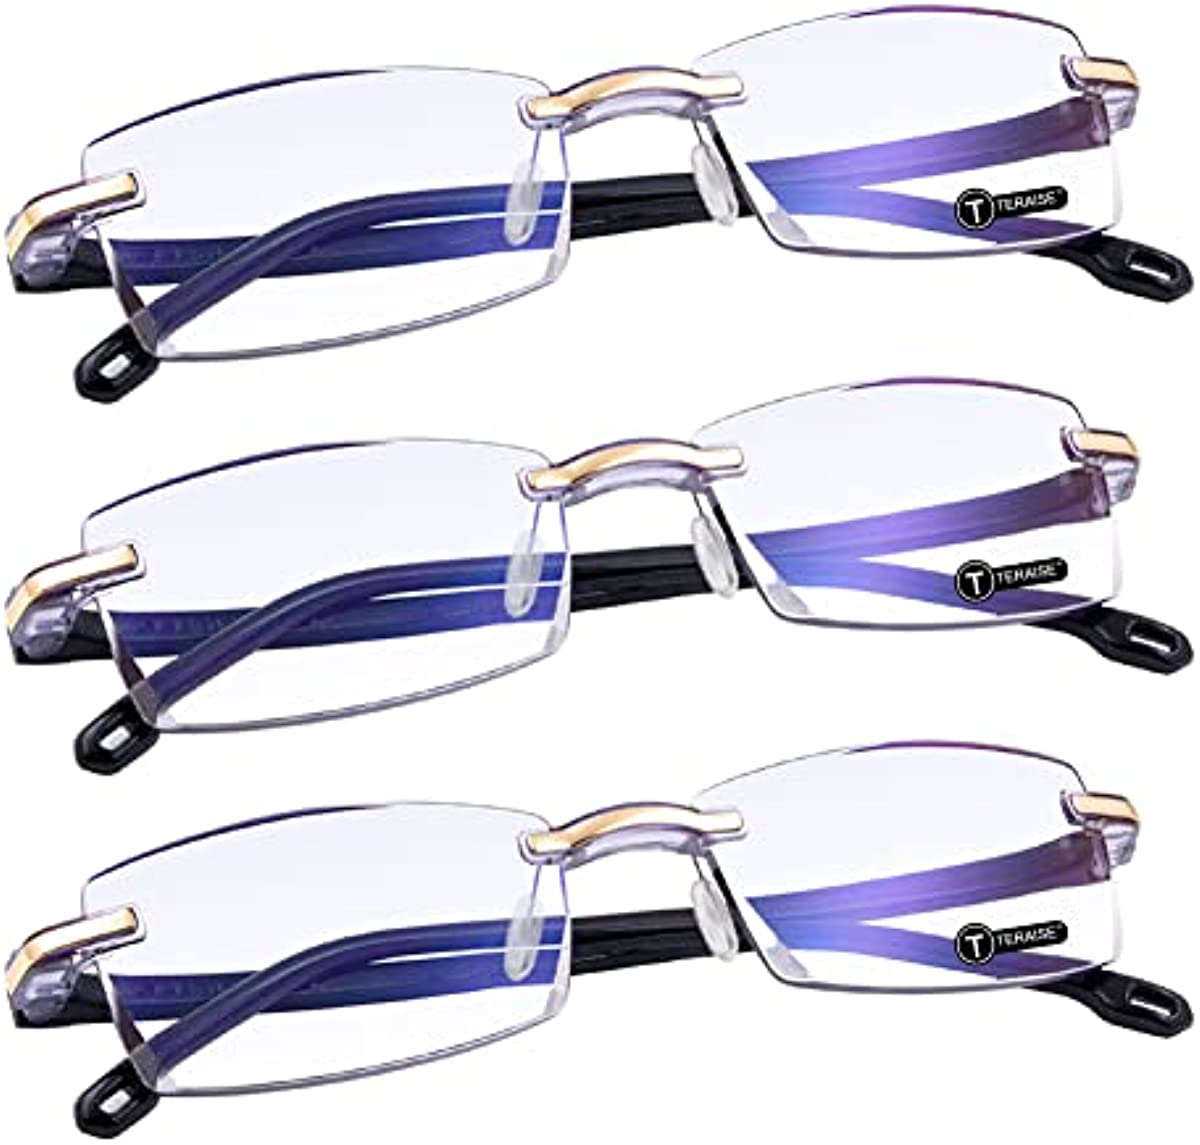 TERAISE Rimless Reading Glasses Fashion Diamond Cutting Design Anti-Fatigue Clear Lens Spectacle Readers for Women